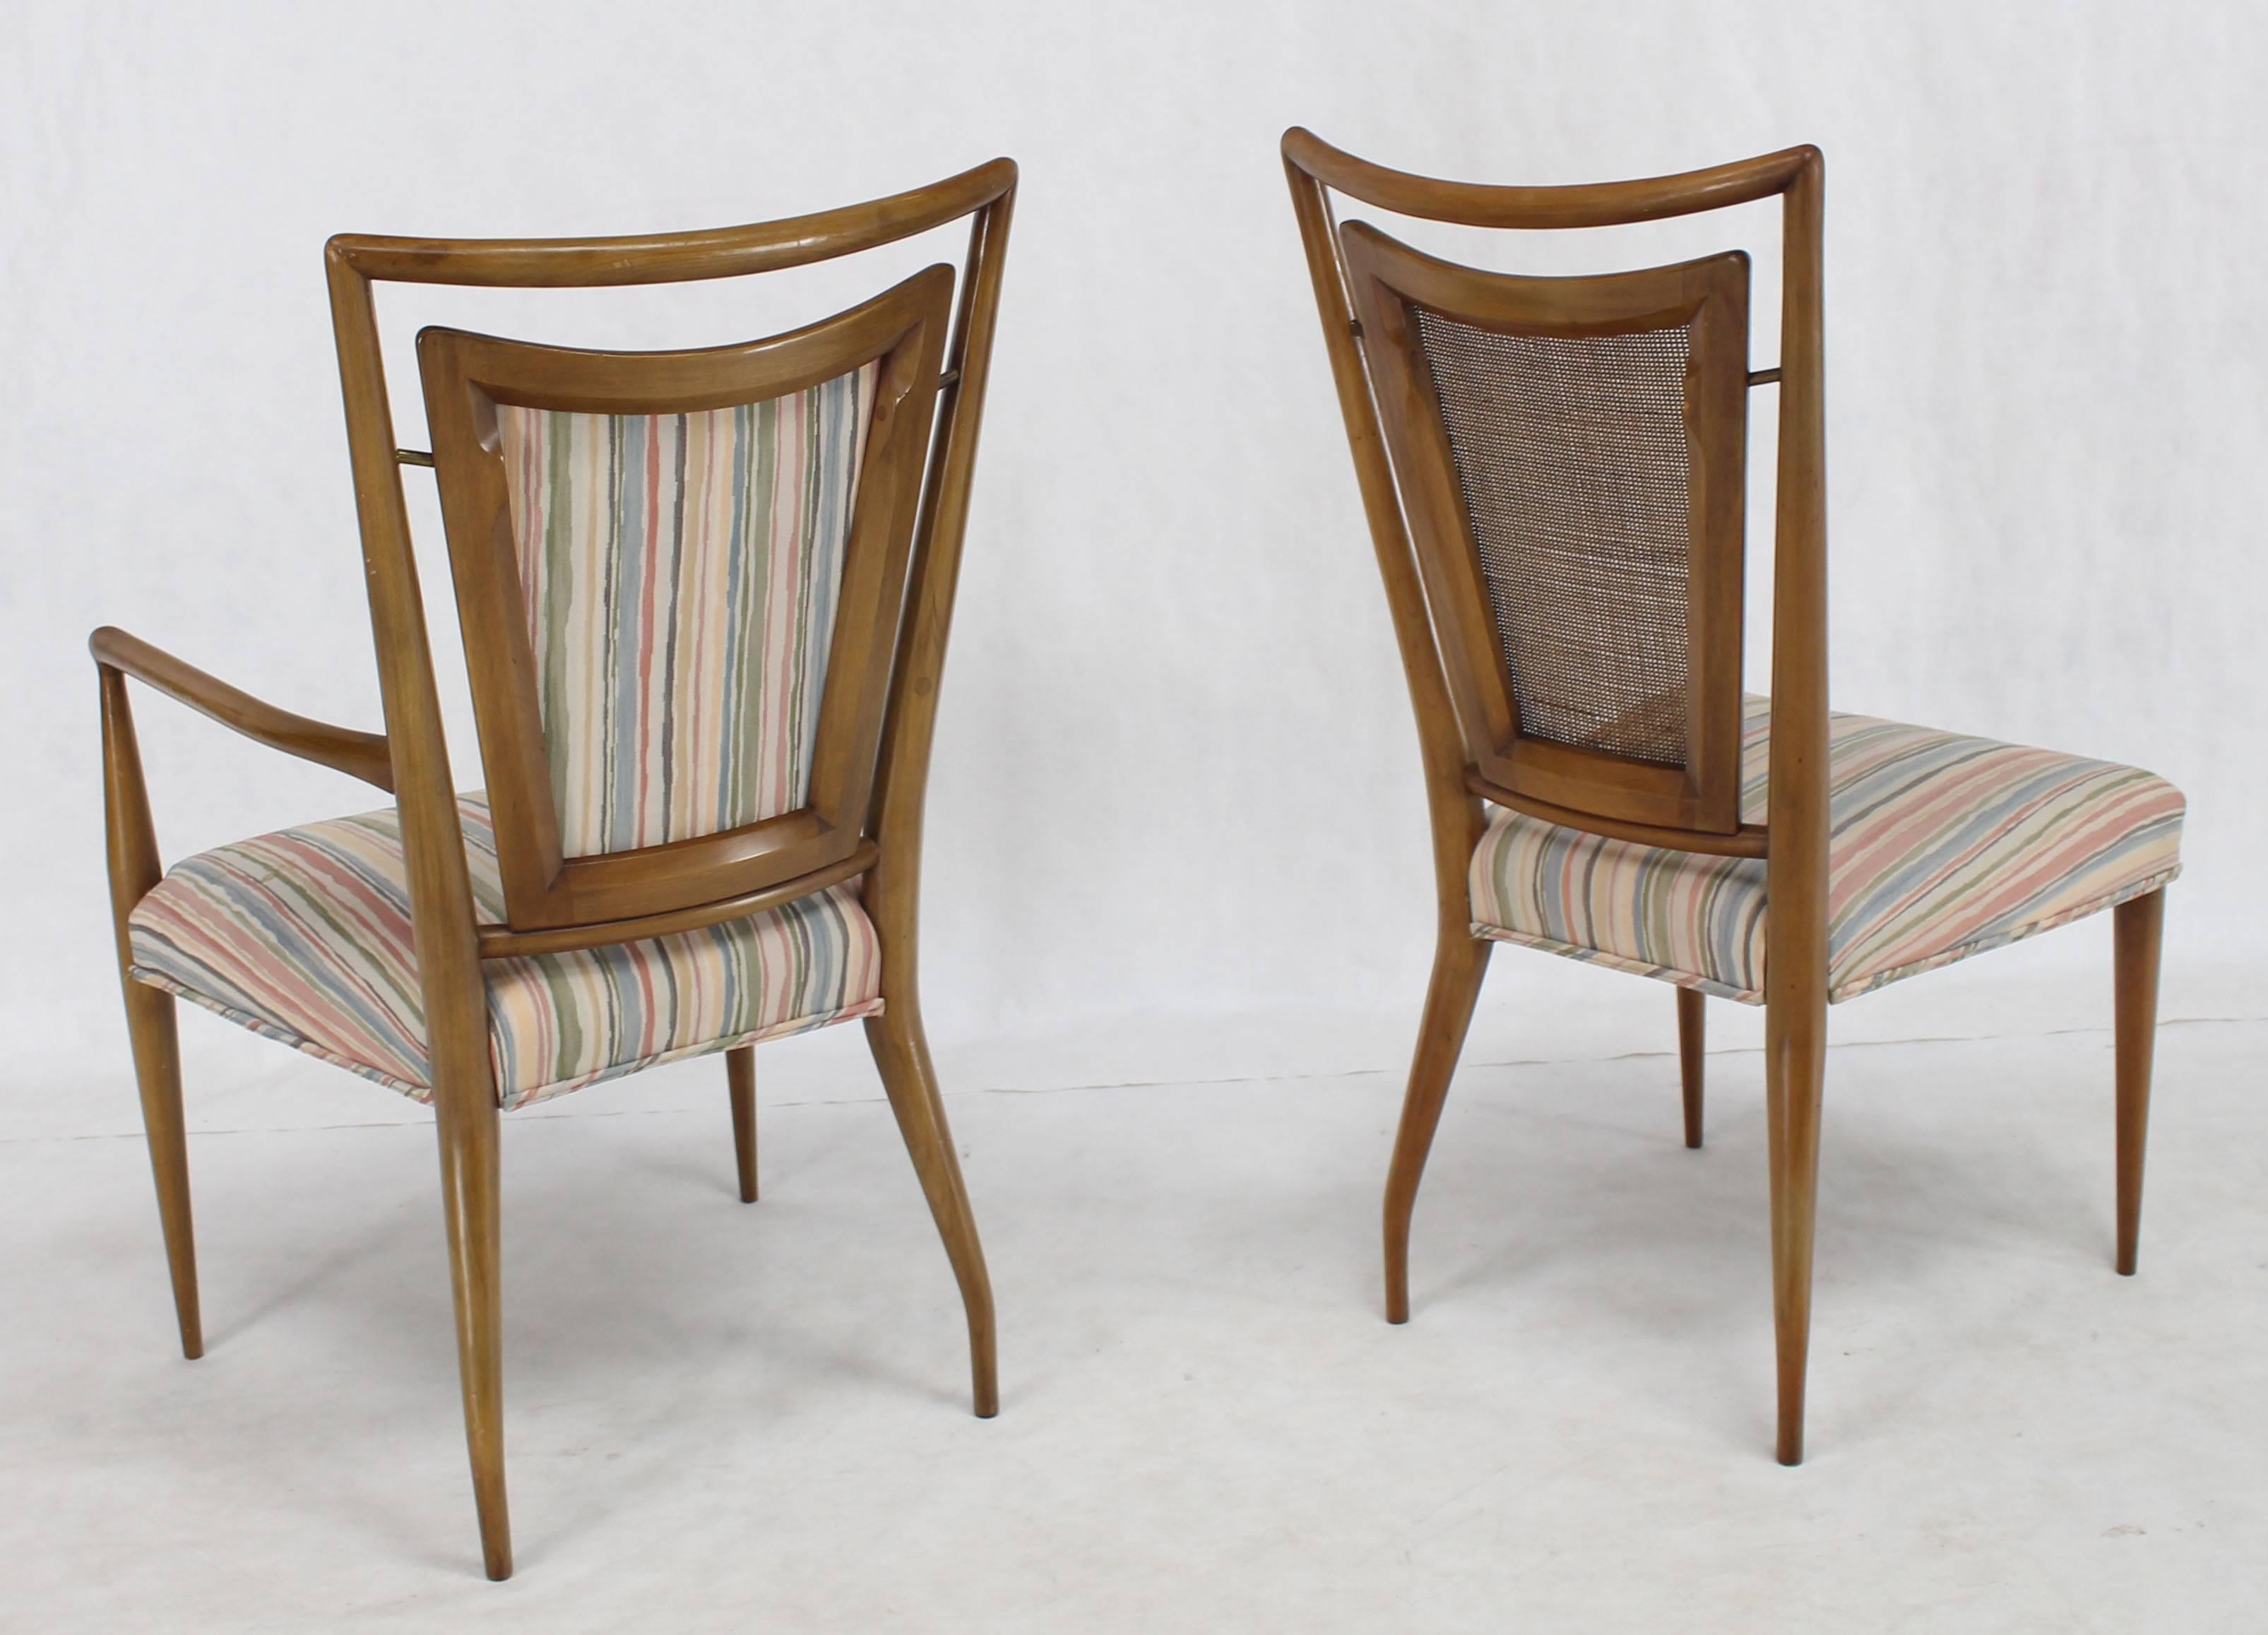 Set of very nice Mid-Century Modern design chairs in style of Gio Ponti. Italian modern influenced style made by Widdicomb.